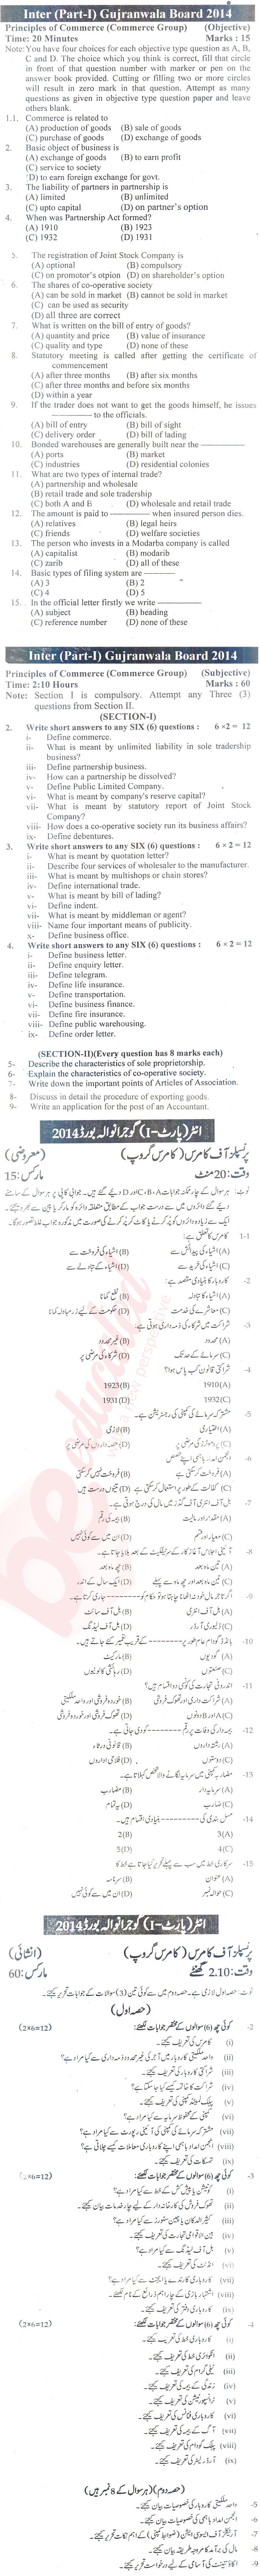 Principles of Commerce ICOM Part 1 Past Paper Group 1 BISE Gujranwala 2014